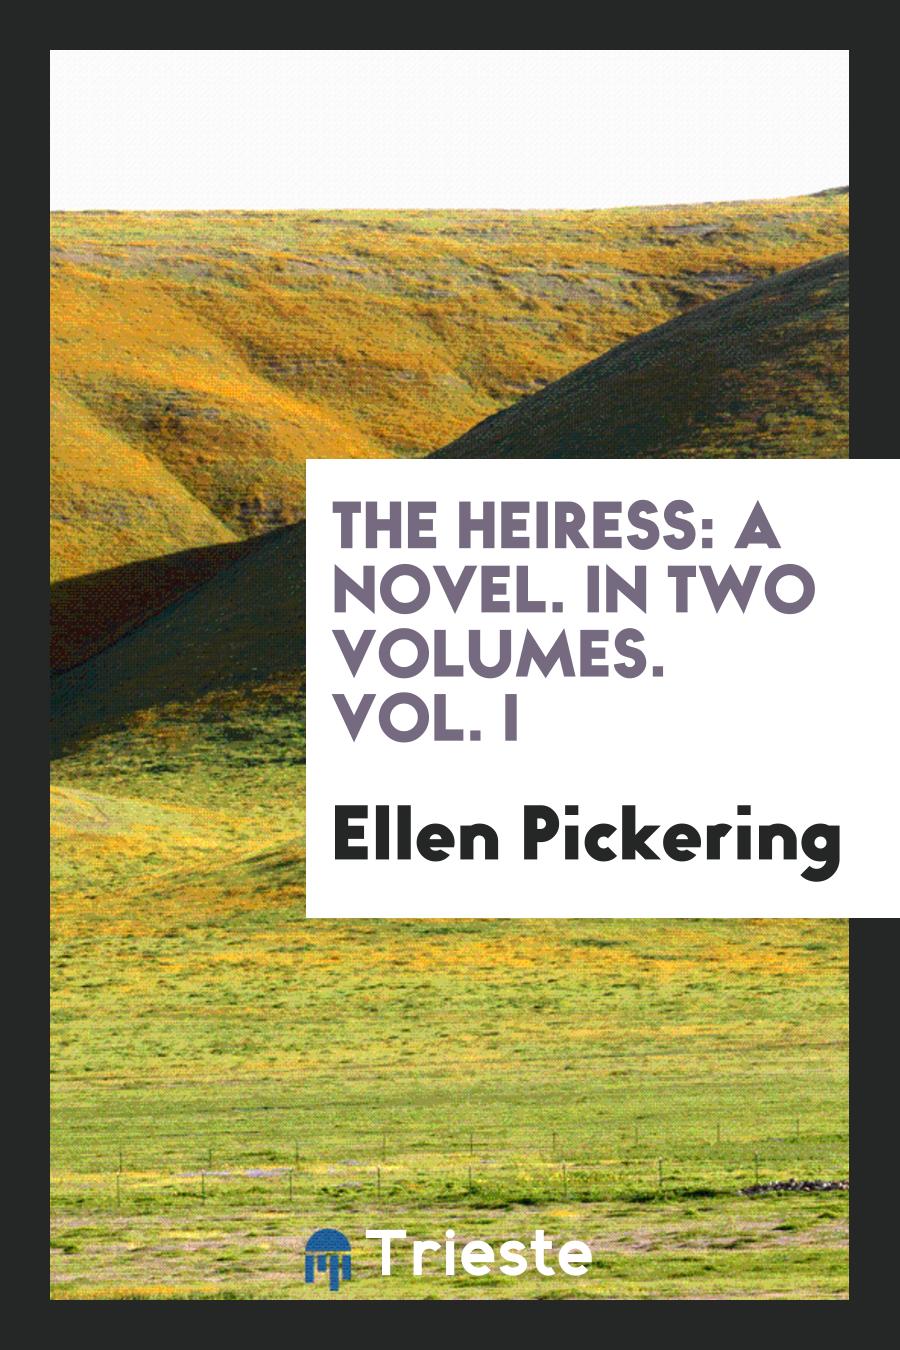 The Heiress: A Novel. In Two Volumes. Vol. I